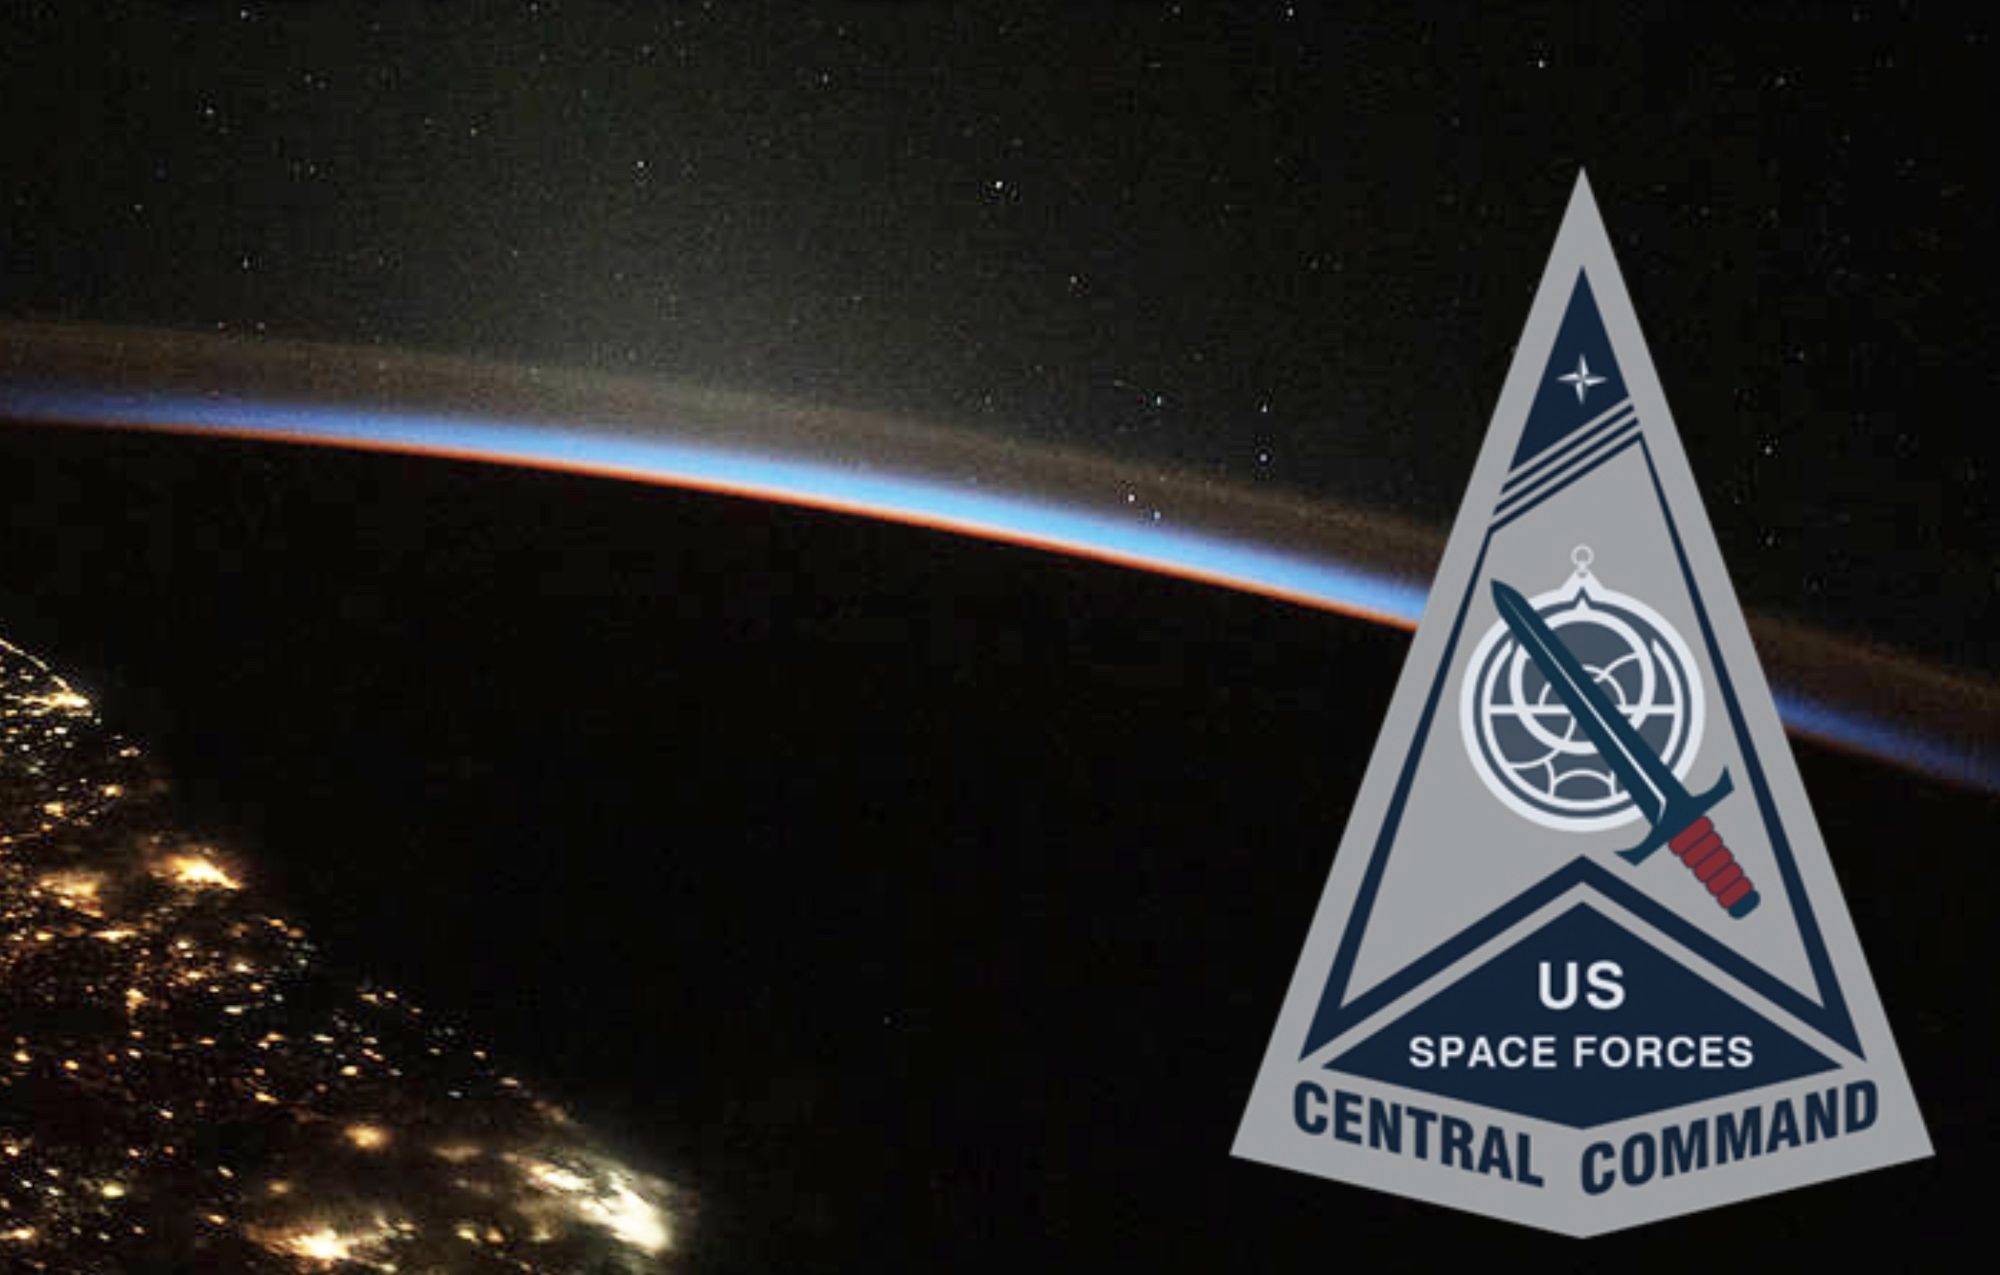 Space Force Activates CENTCOM Component to Gain Influence, Extend Support